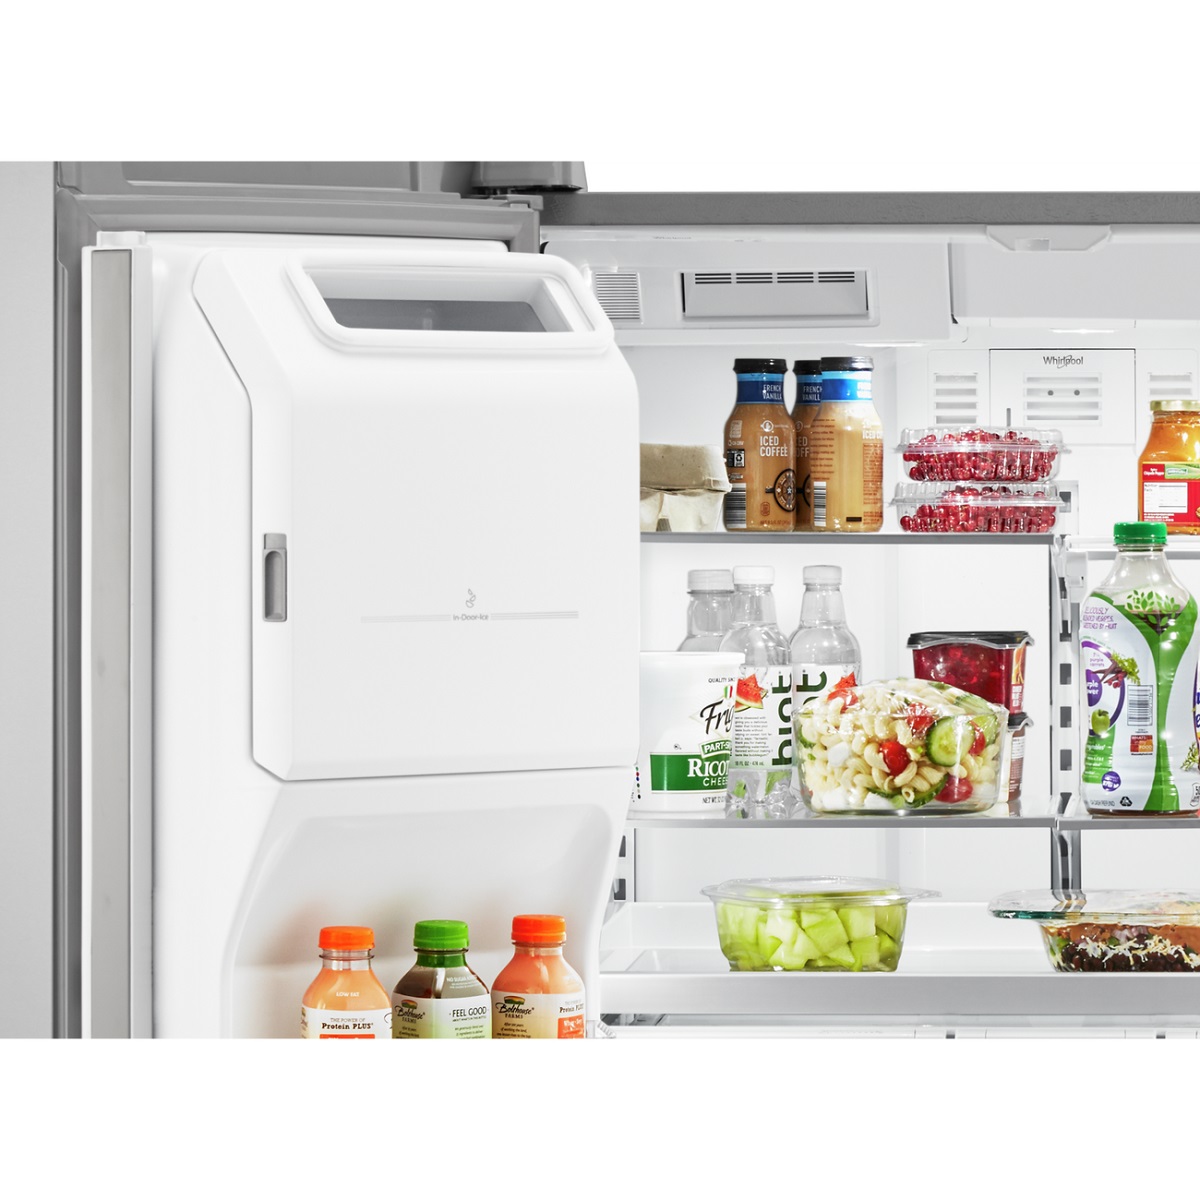 How Do You Reset The Ice Maker On A Whirlpool French Door Refrigerator?